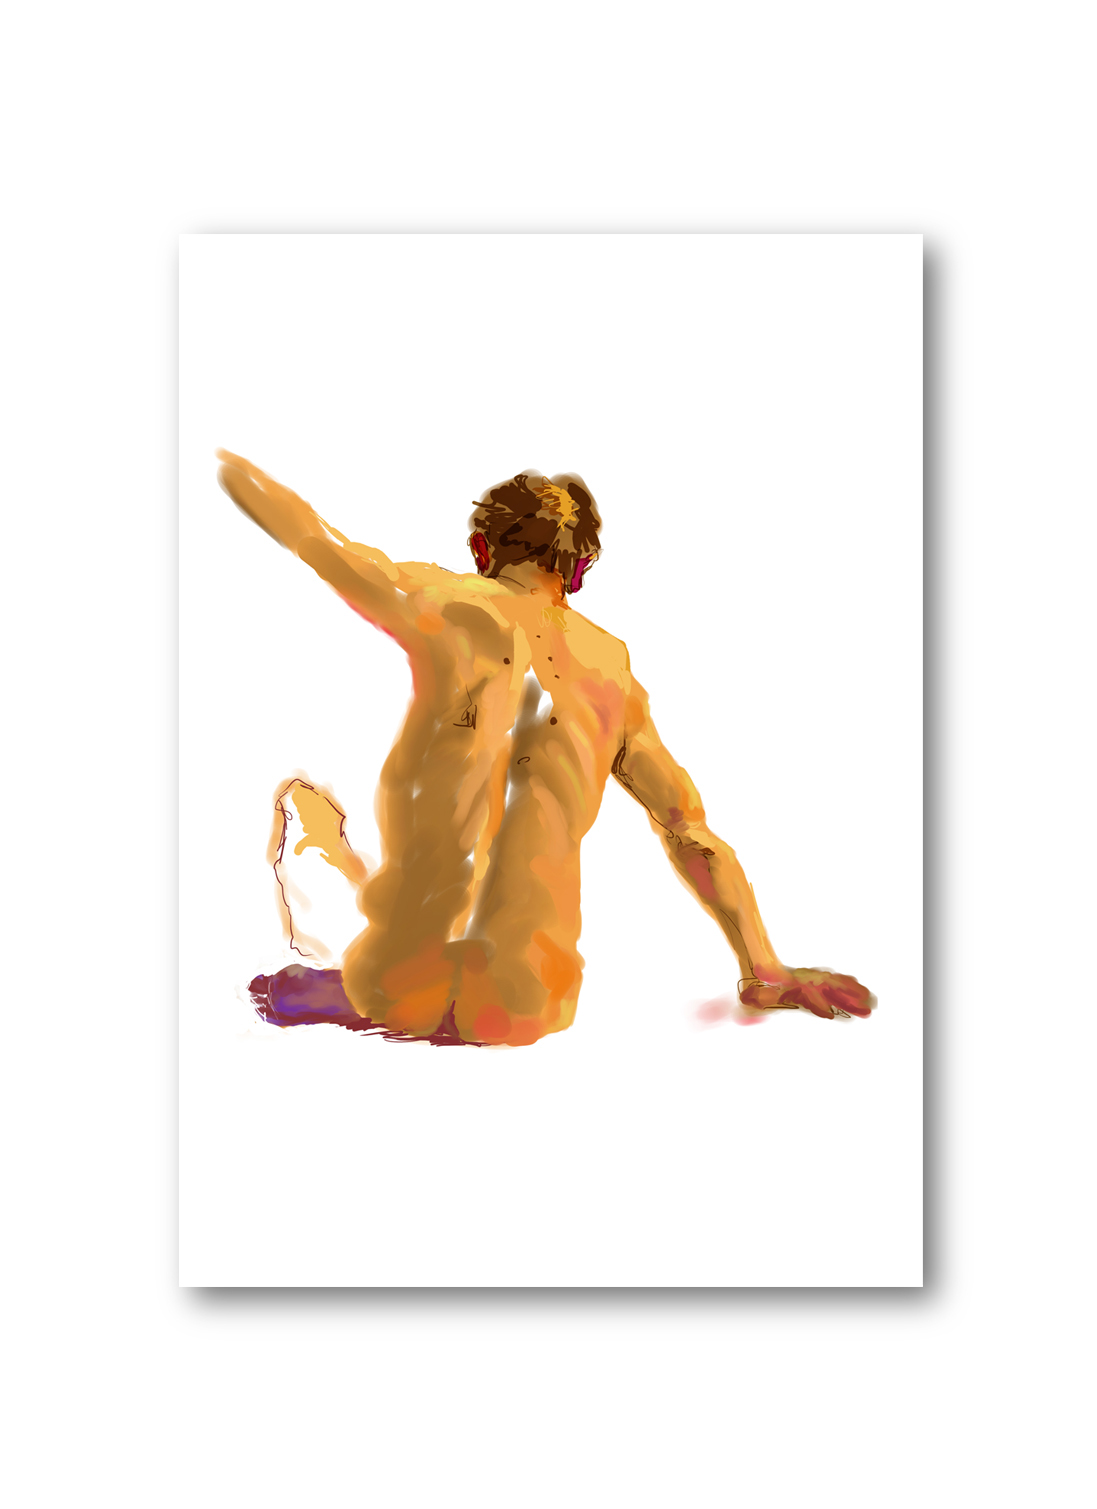 man naked sketches colors old